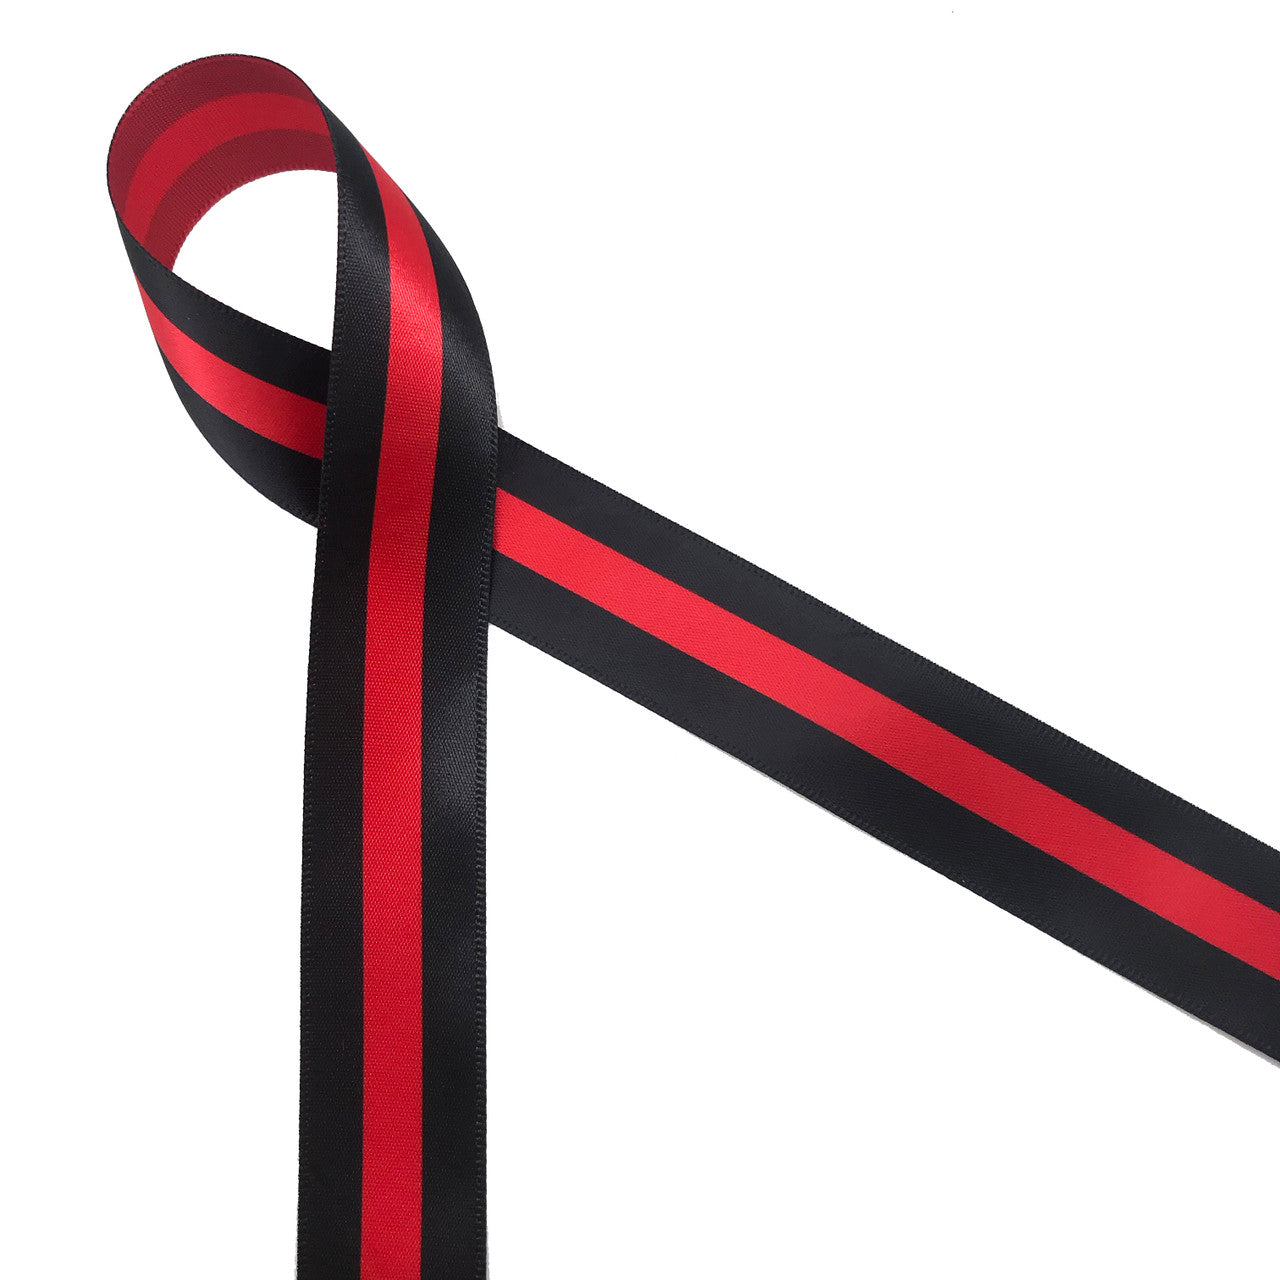 Firefighter thin red line ribbon for lapel pin, memorial service, funeral,  Mass, floral pieces, printed on 7/8 red satin